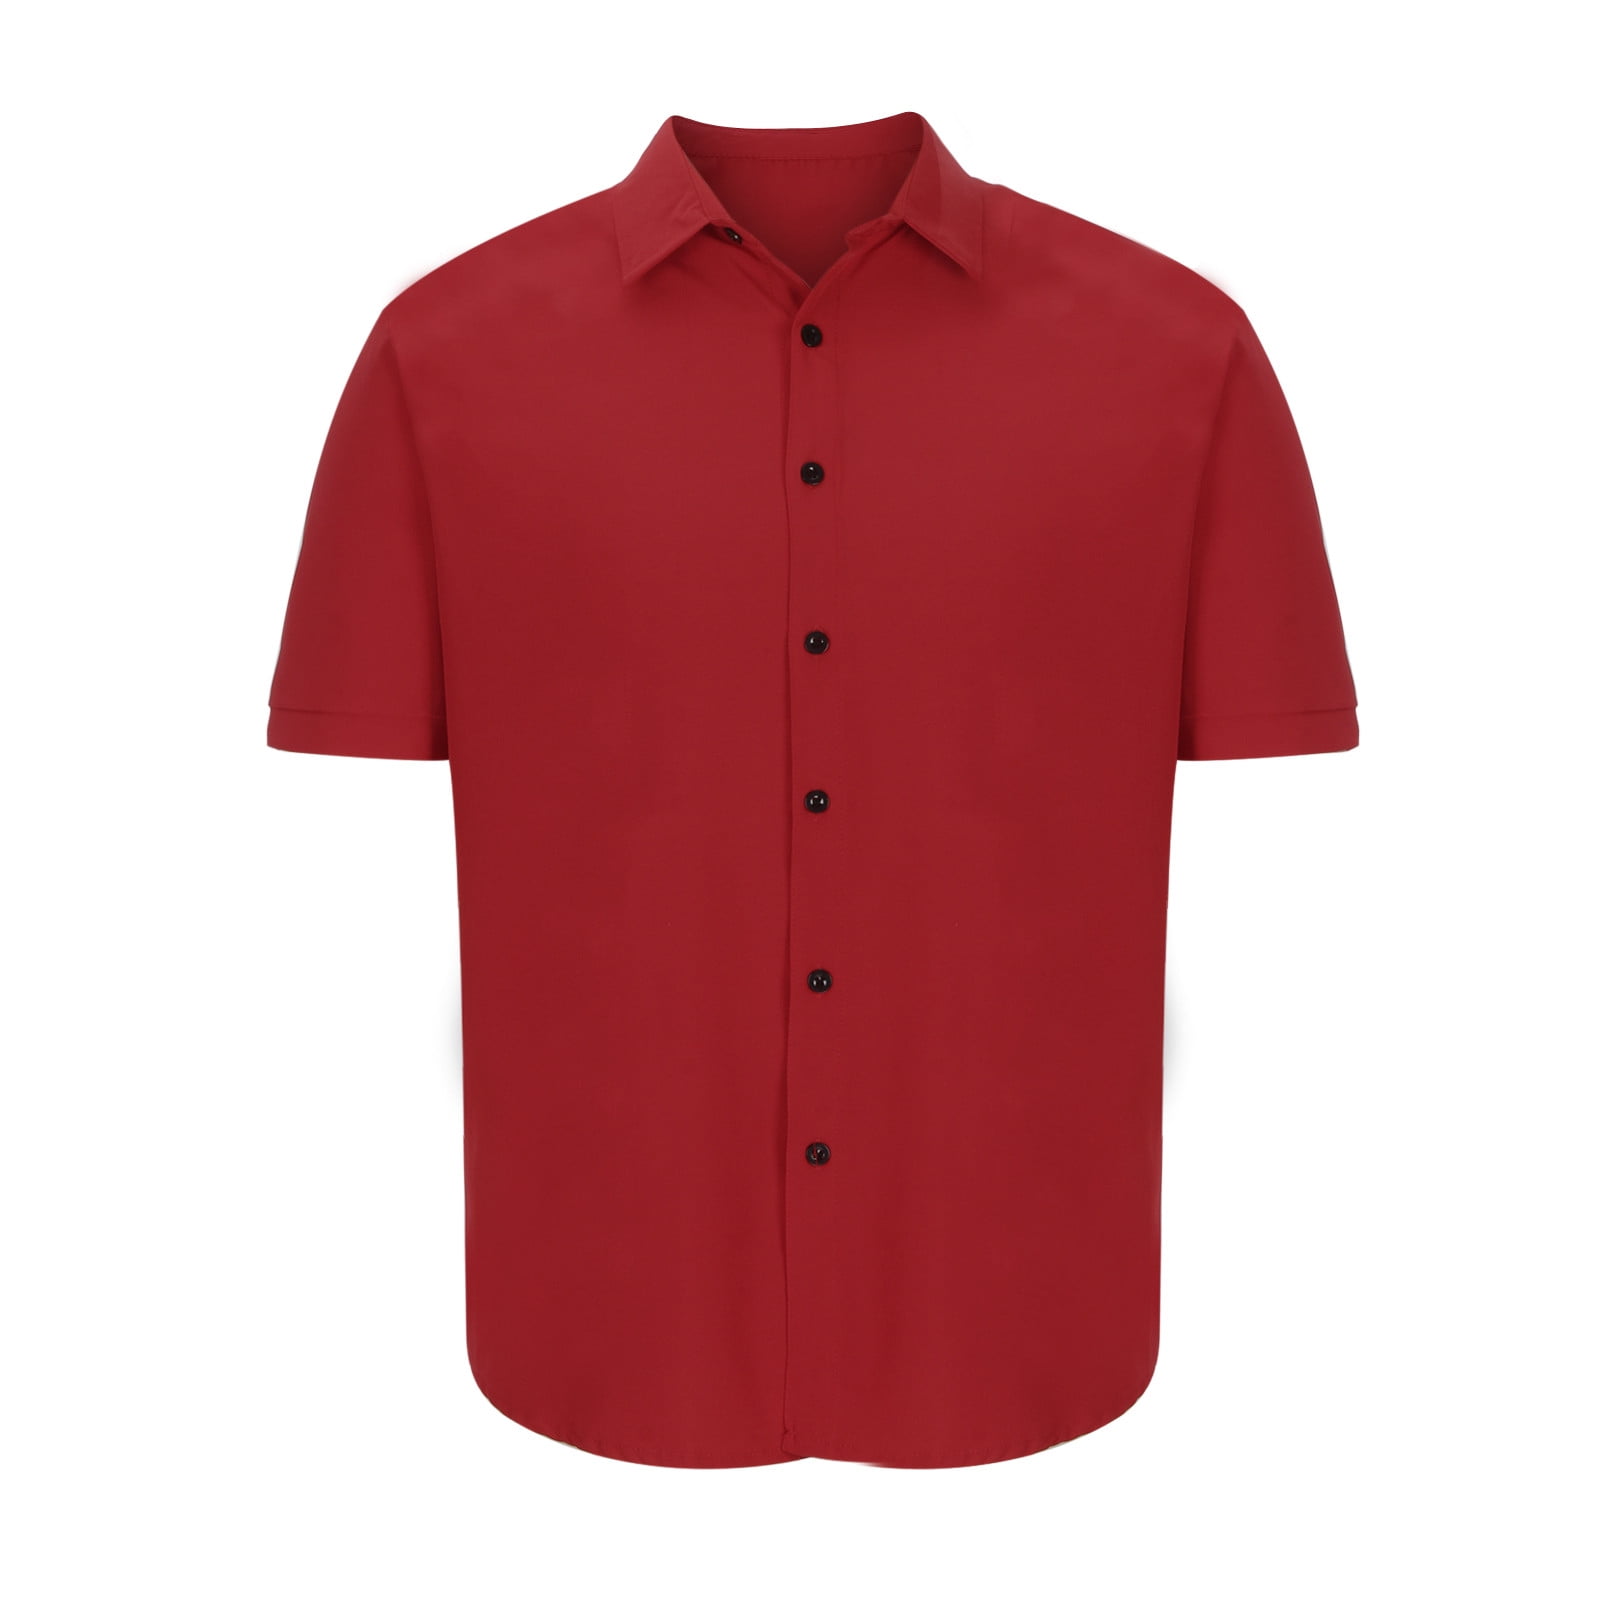 YYDGH Men's Muscle Dress Shirts Slim Fit Stretch Short Sleeve Athletic Fit  Button Down Shirts Red XXL 